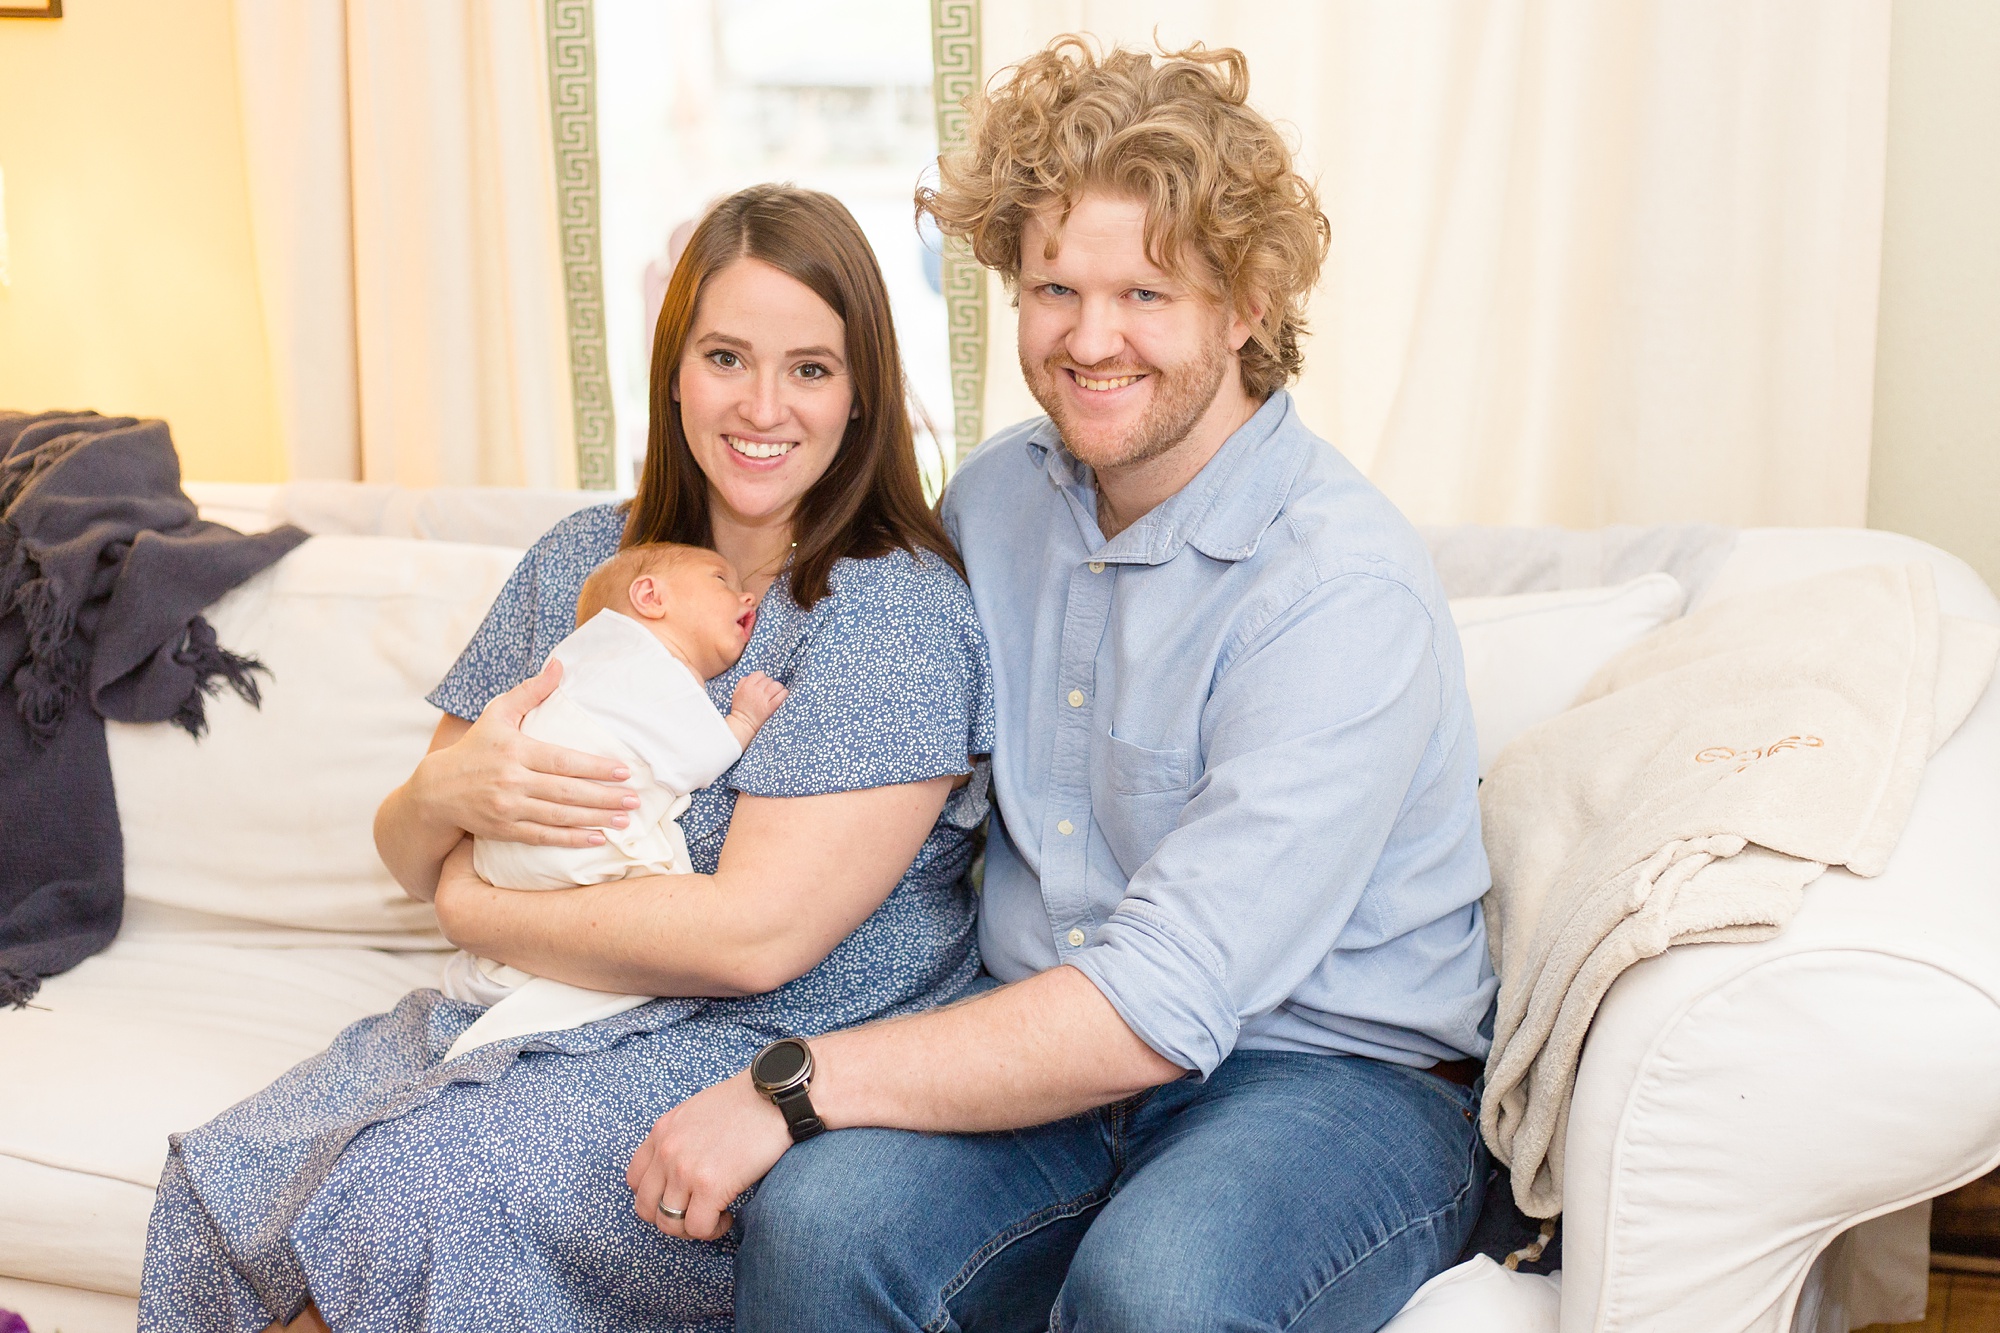 parents sit on couch with new baby at home